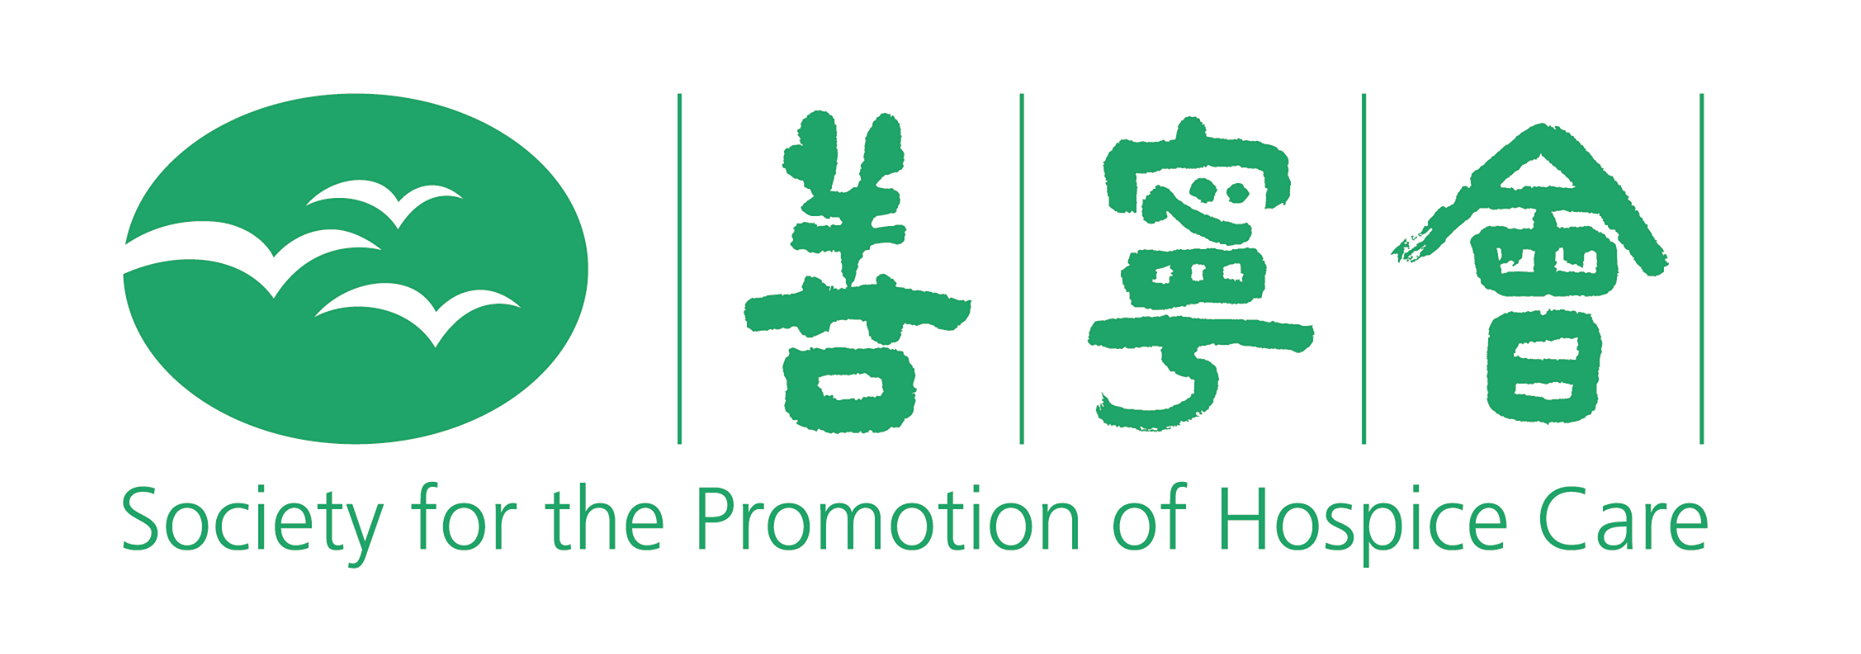 The Society for the Promotiono of Hospice Care 善寧會